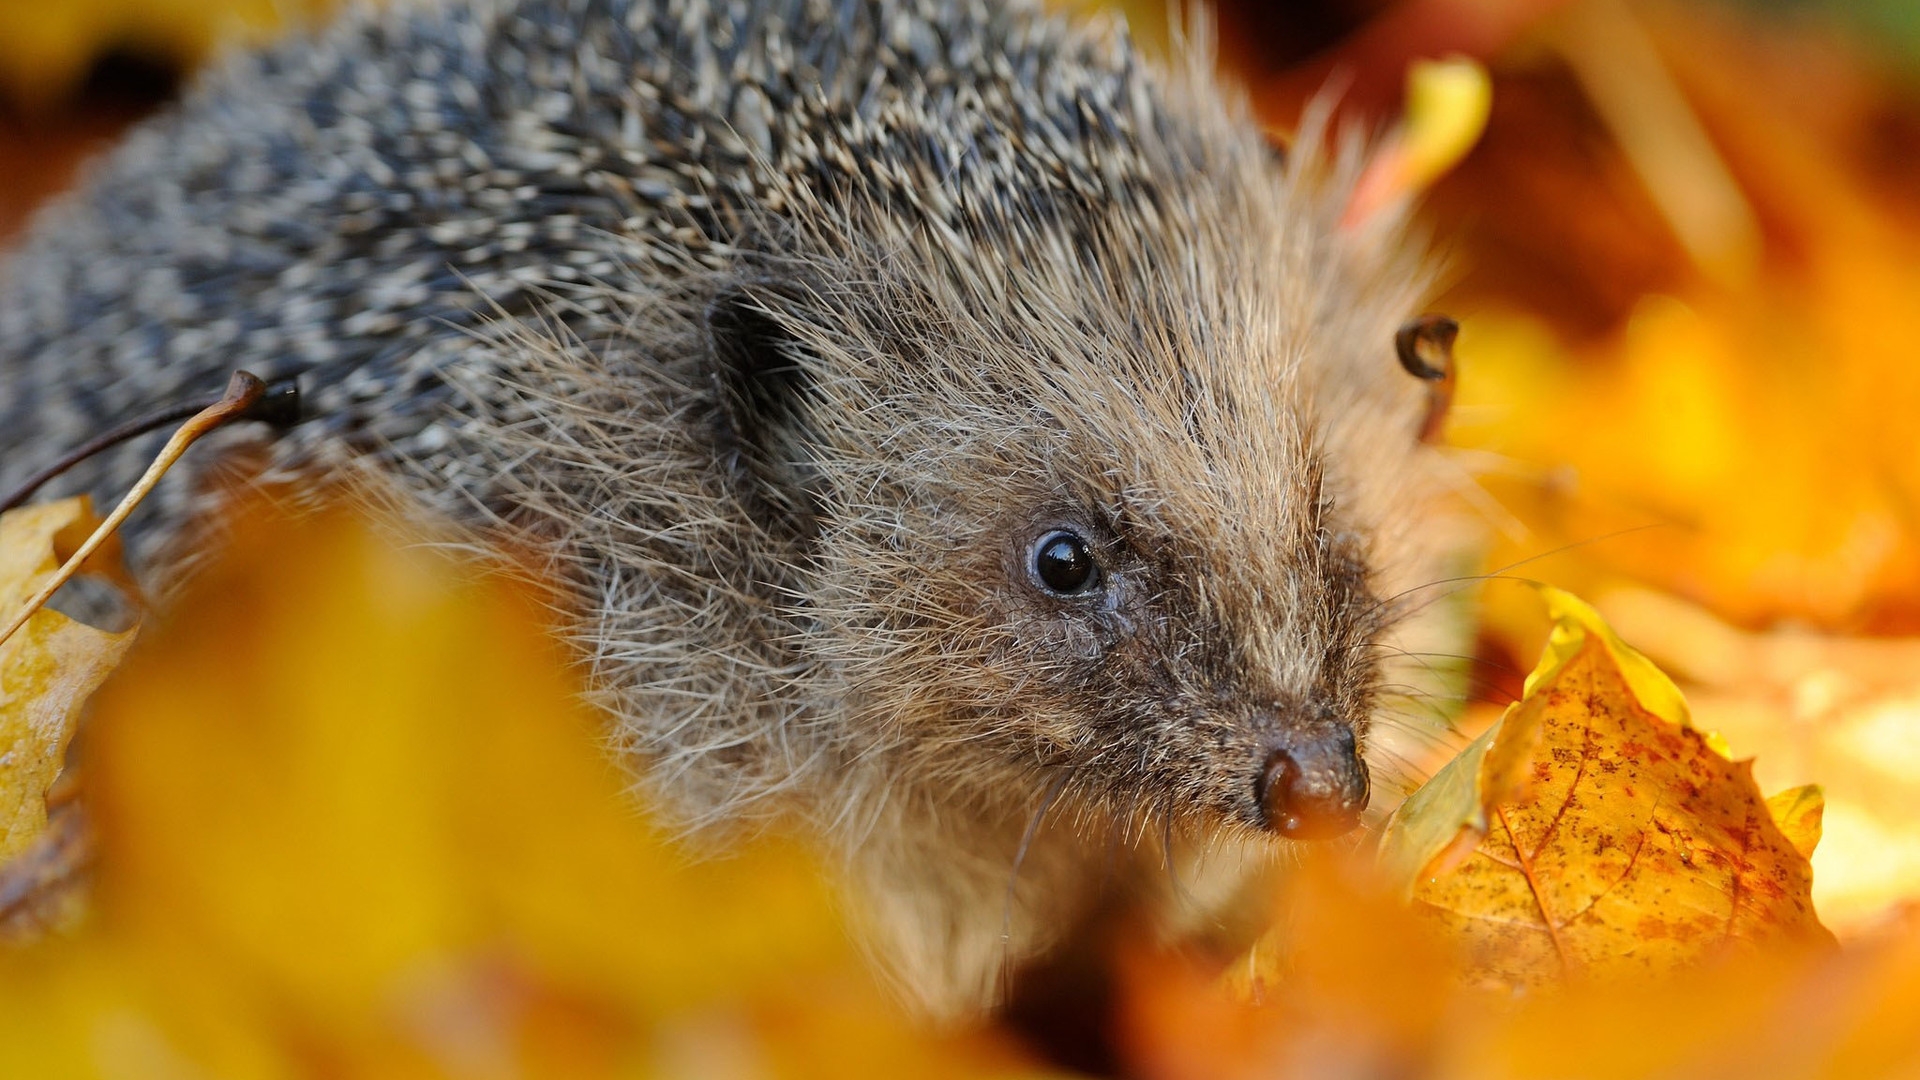 Hedgehog in Autumn Leaves for 1920 x 1080 HDTV 1080p resolution